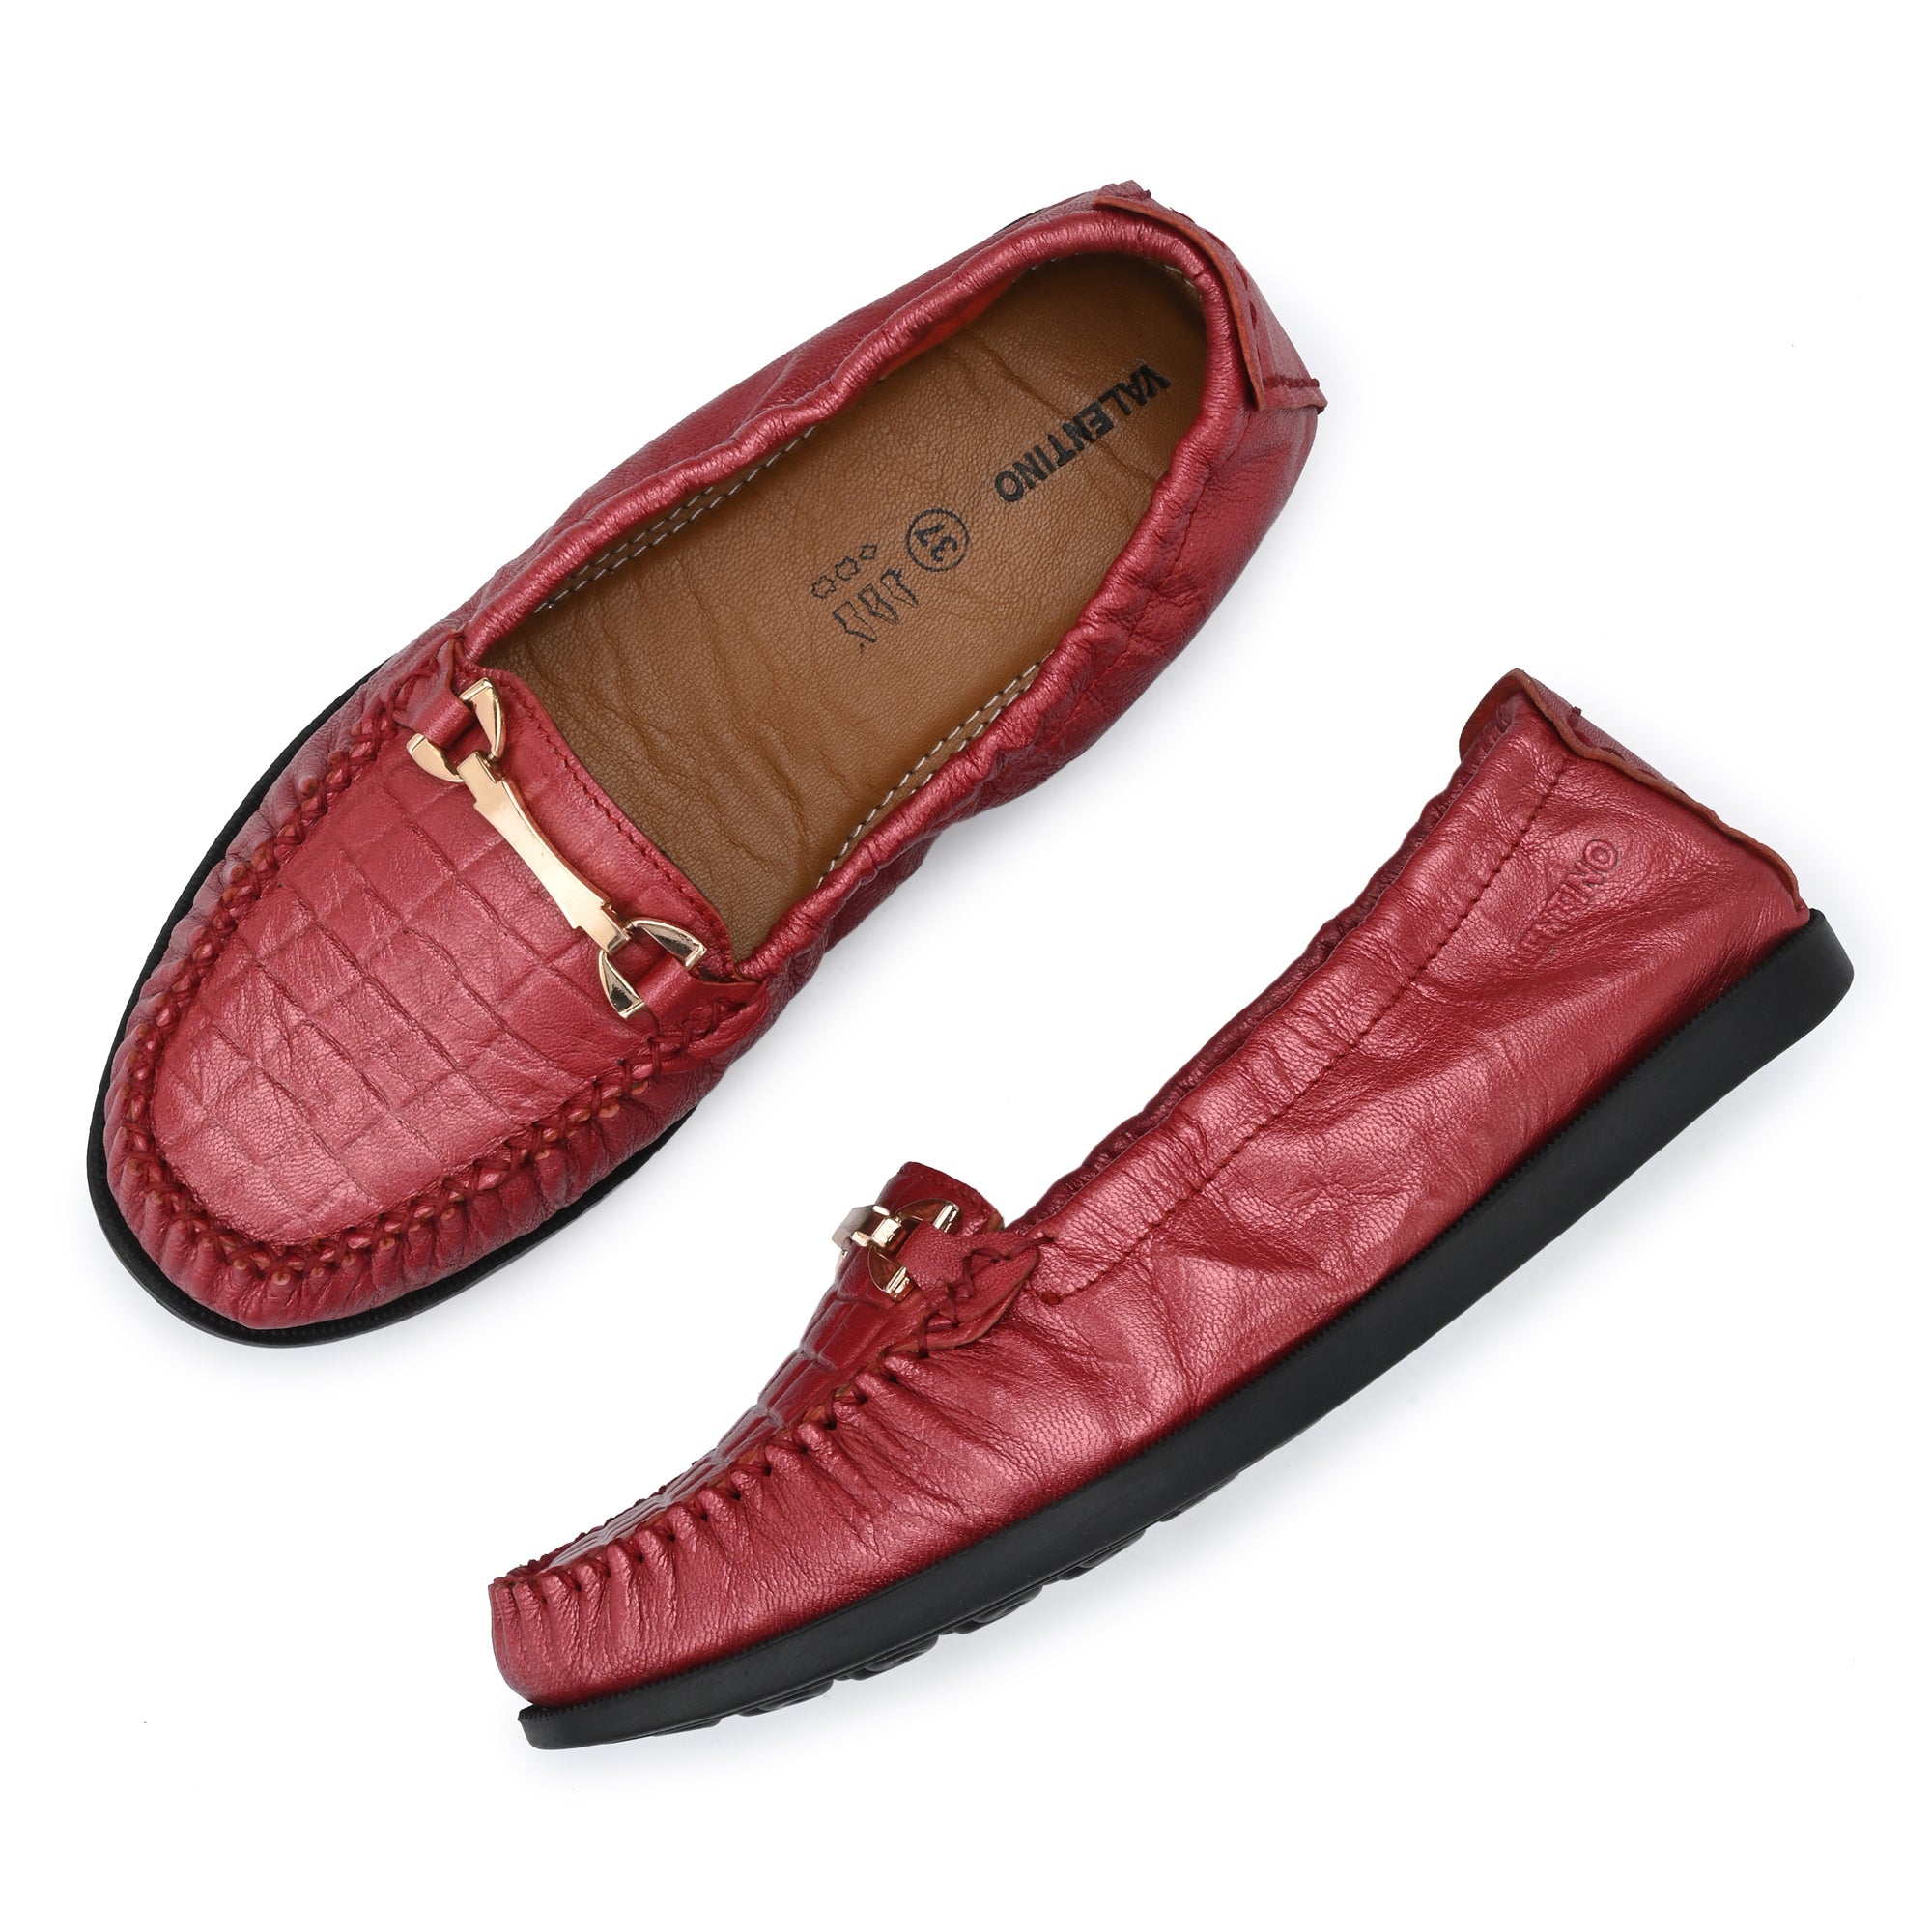 W-FLEXY-13 WOMEN LEATHER RED CASUAL SLIP ON LOAFER